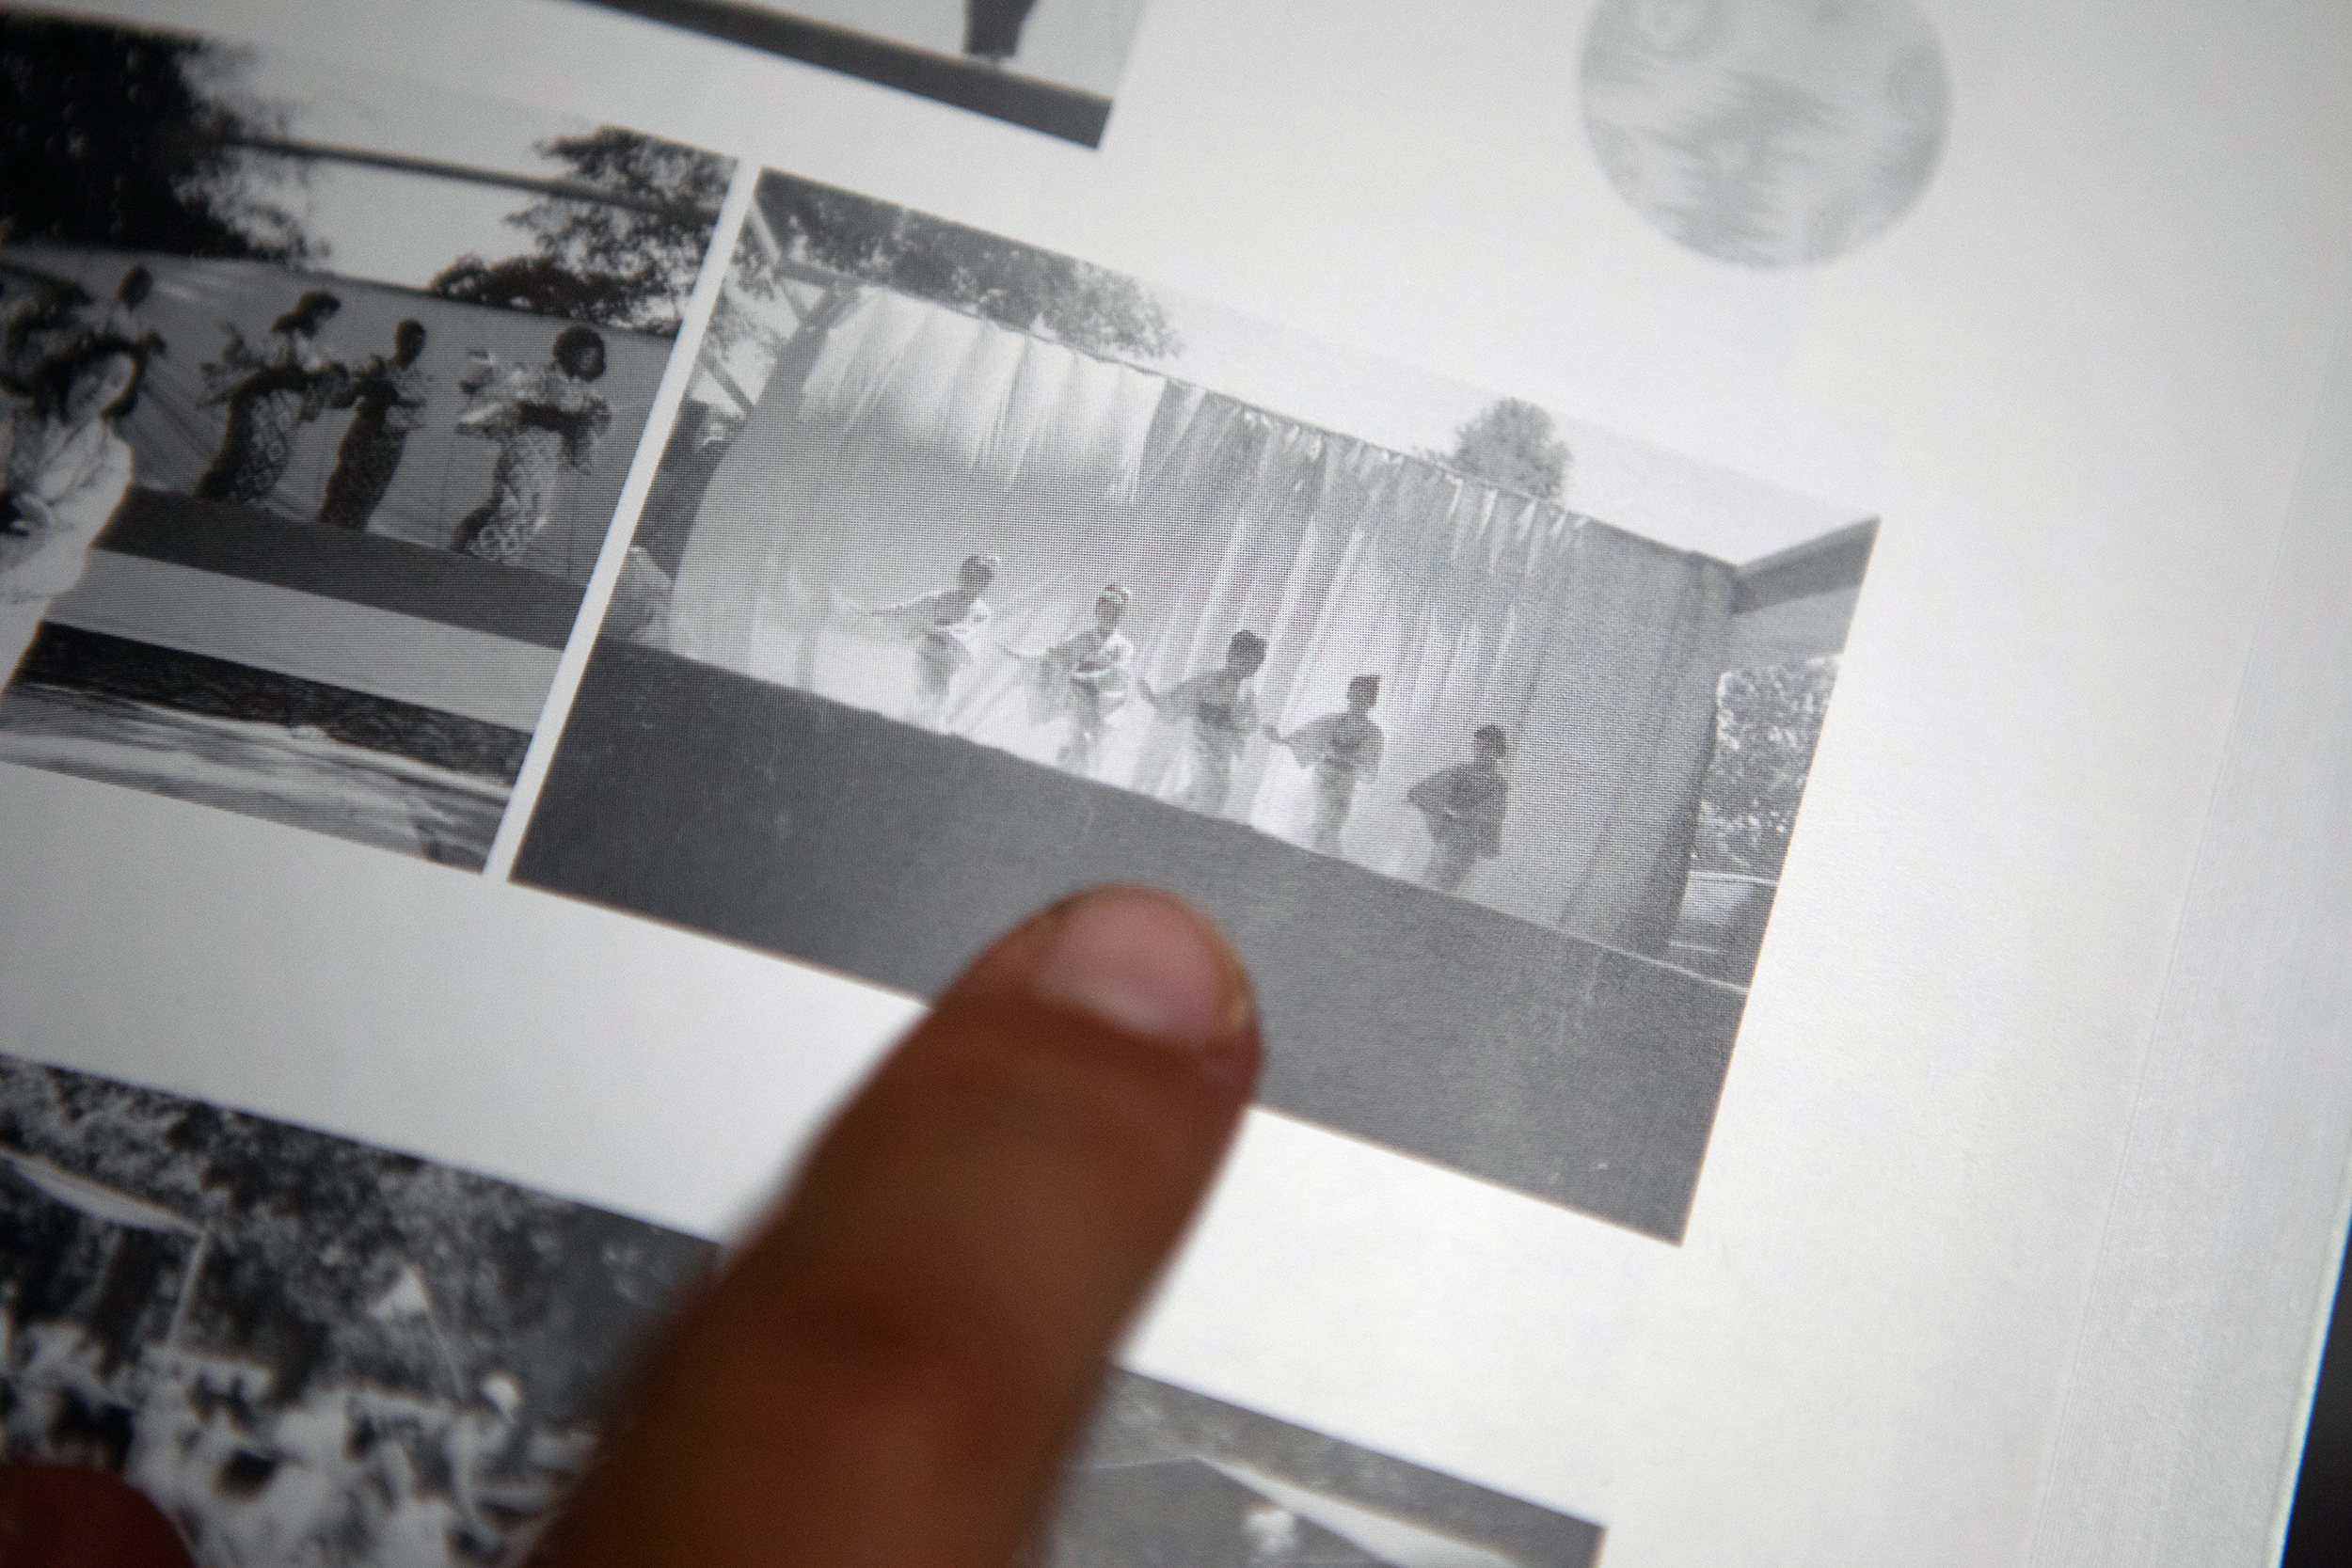 Finger pointing to a black and white photo of Okinawan dancers.